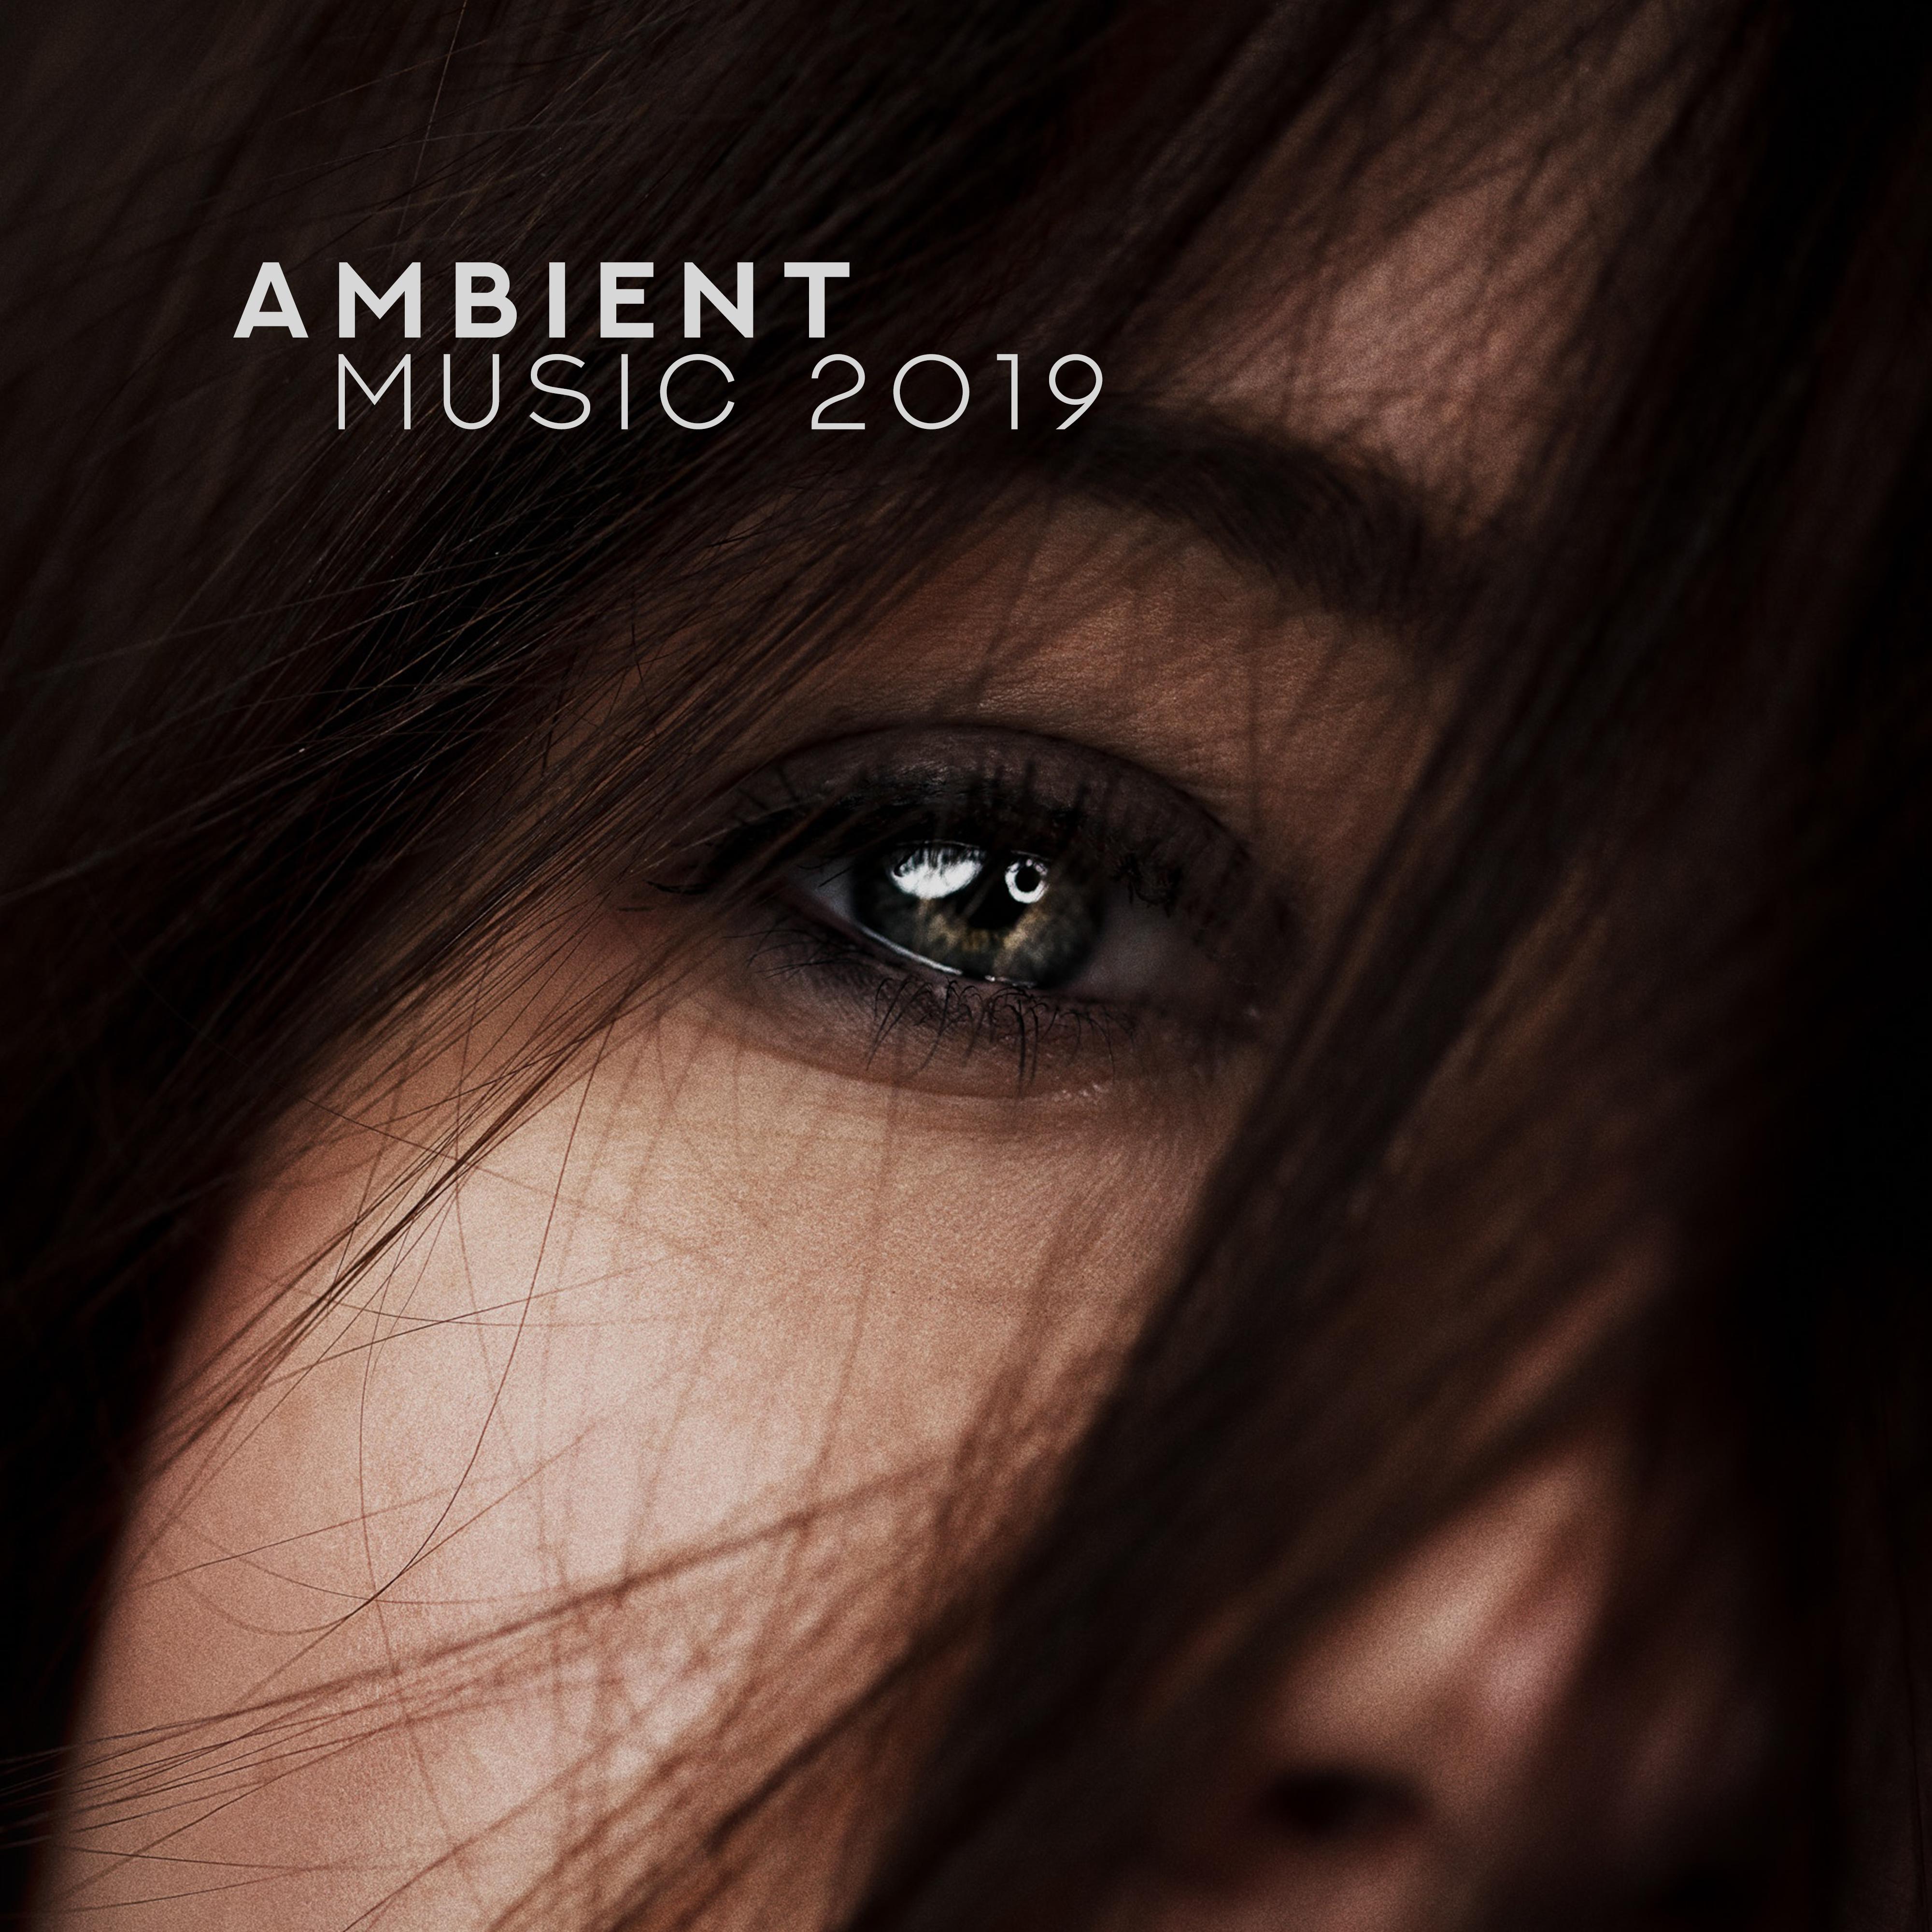 Ambient Music 2019  Relaxing Sounds After Work, Famous Covers for Relaxation  Rest